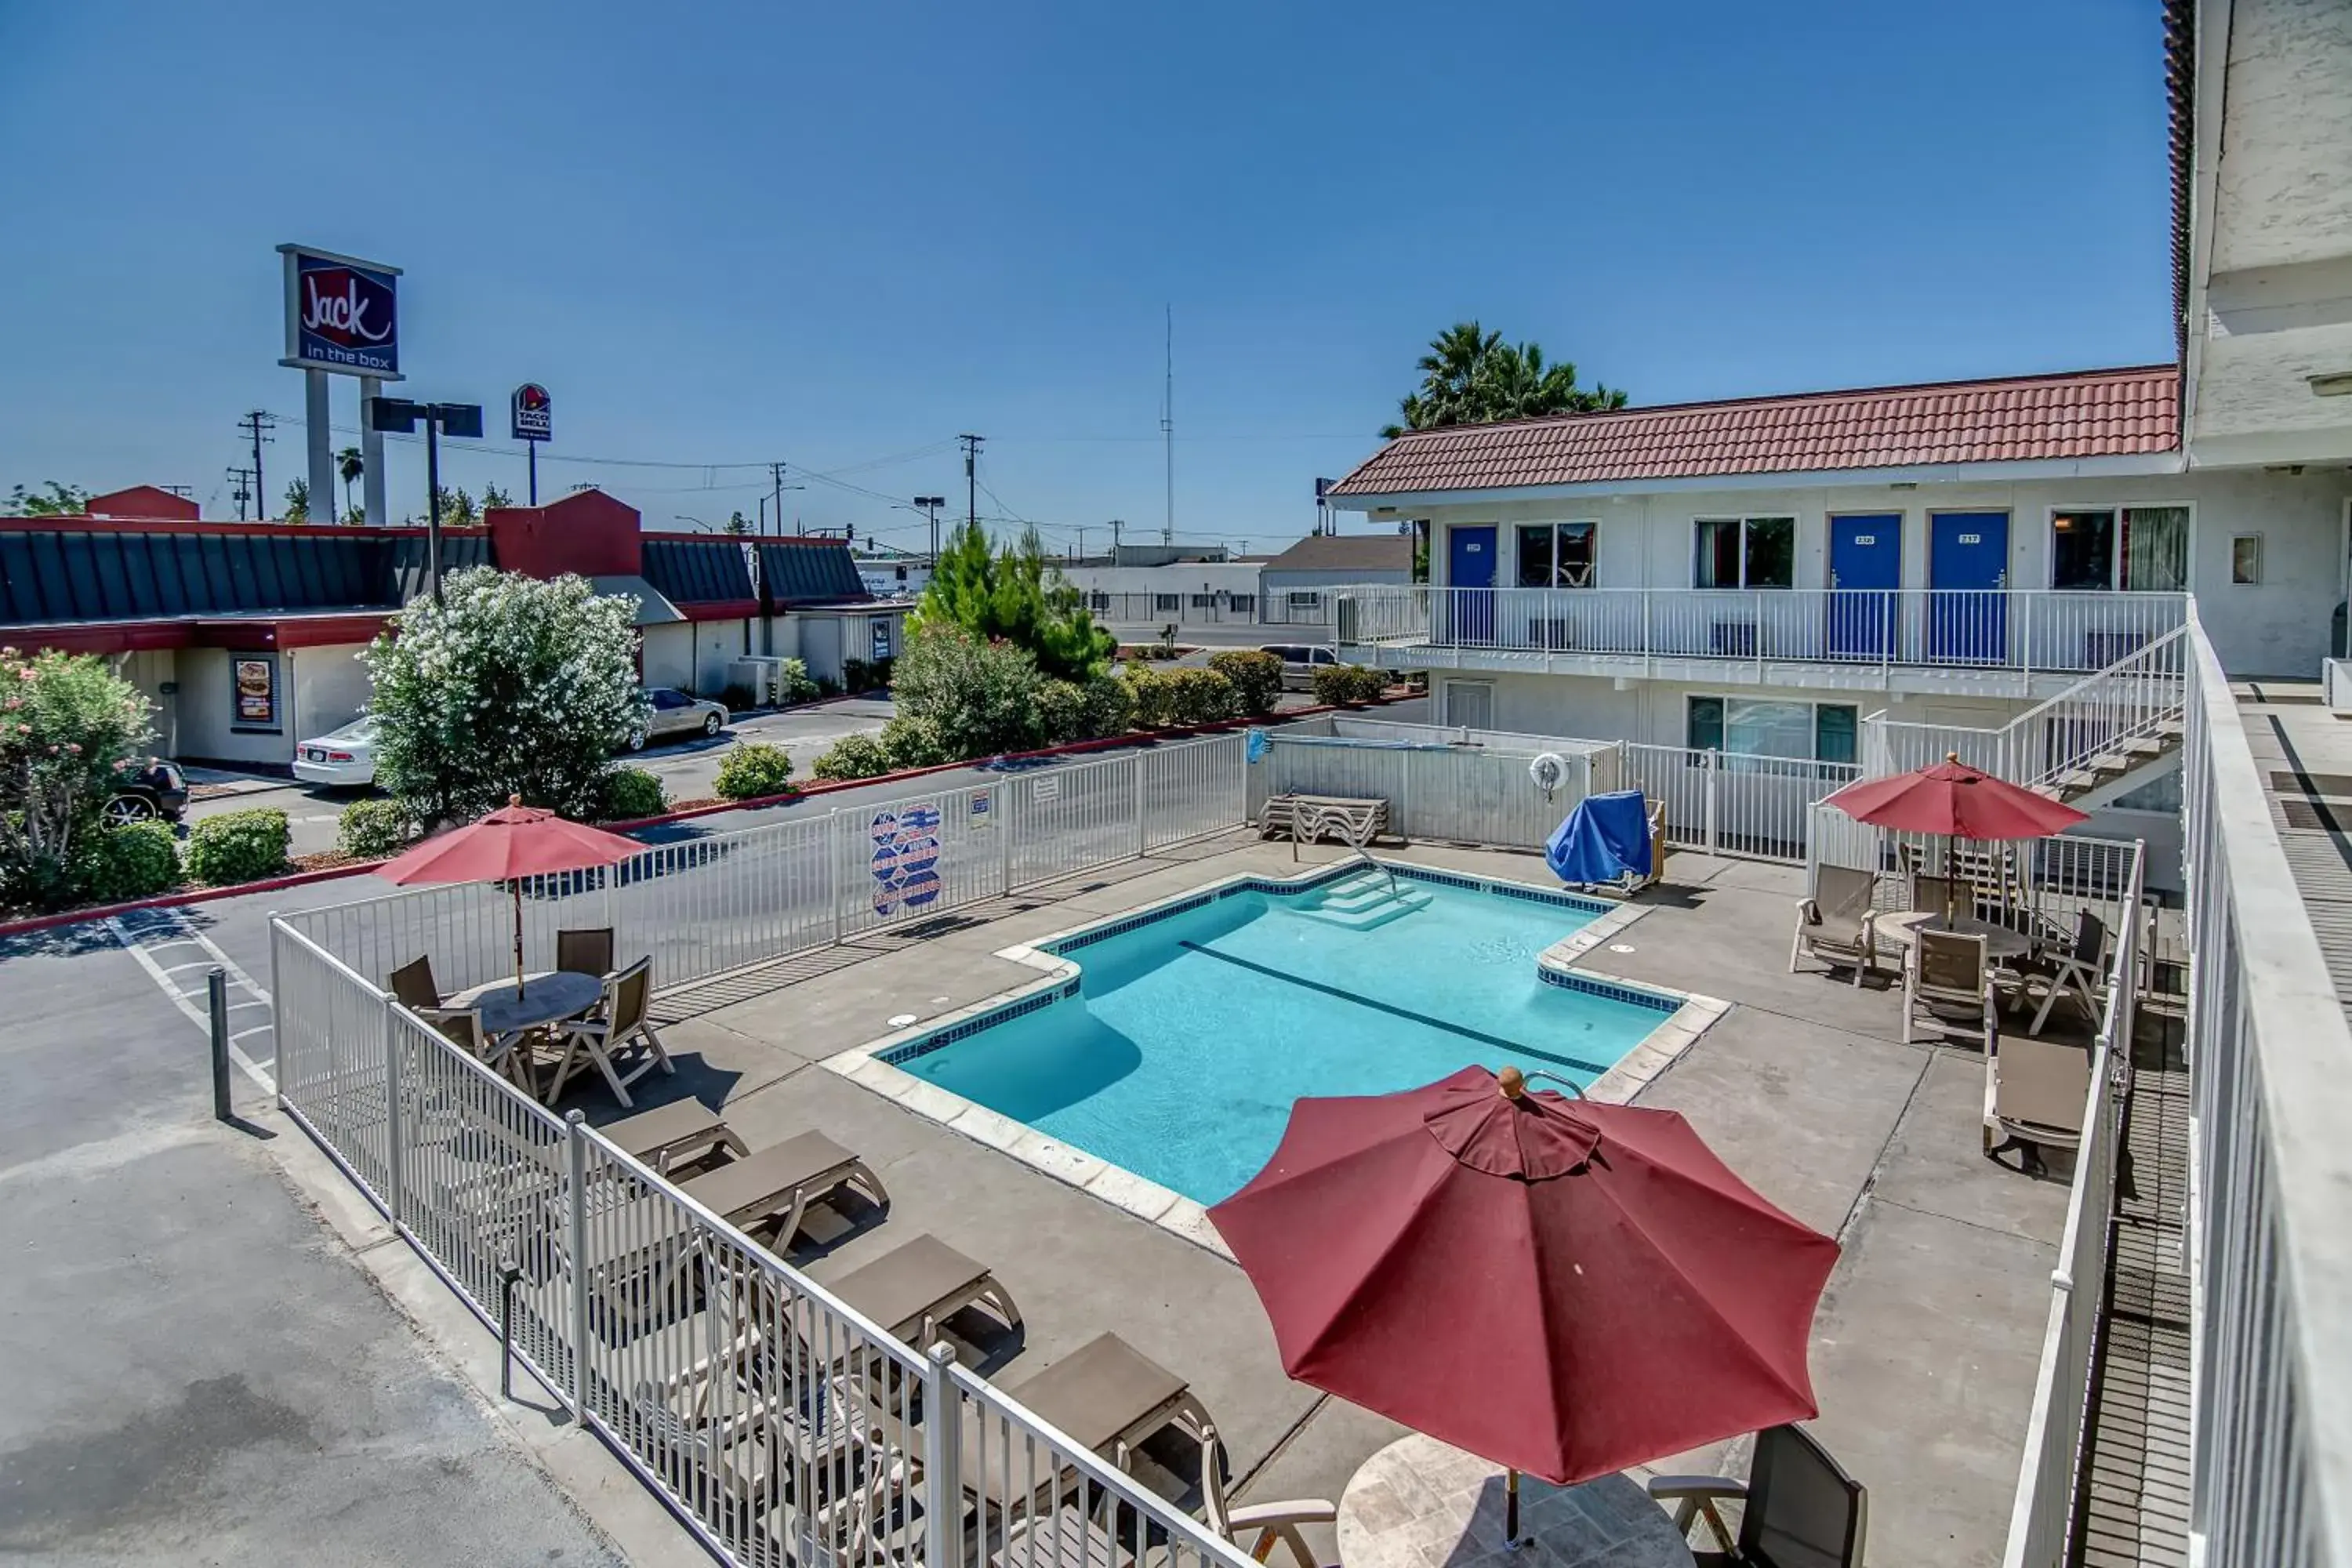 Swimming pool, Pool View in Motel 6-Stockton, CA - Charter Way West